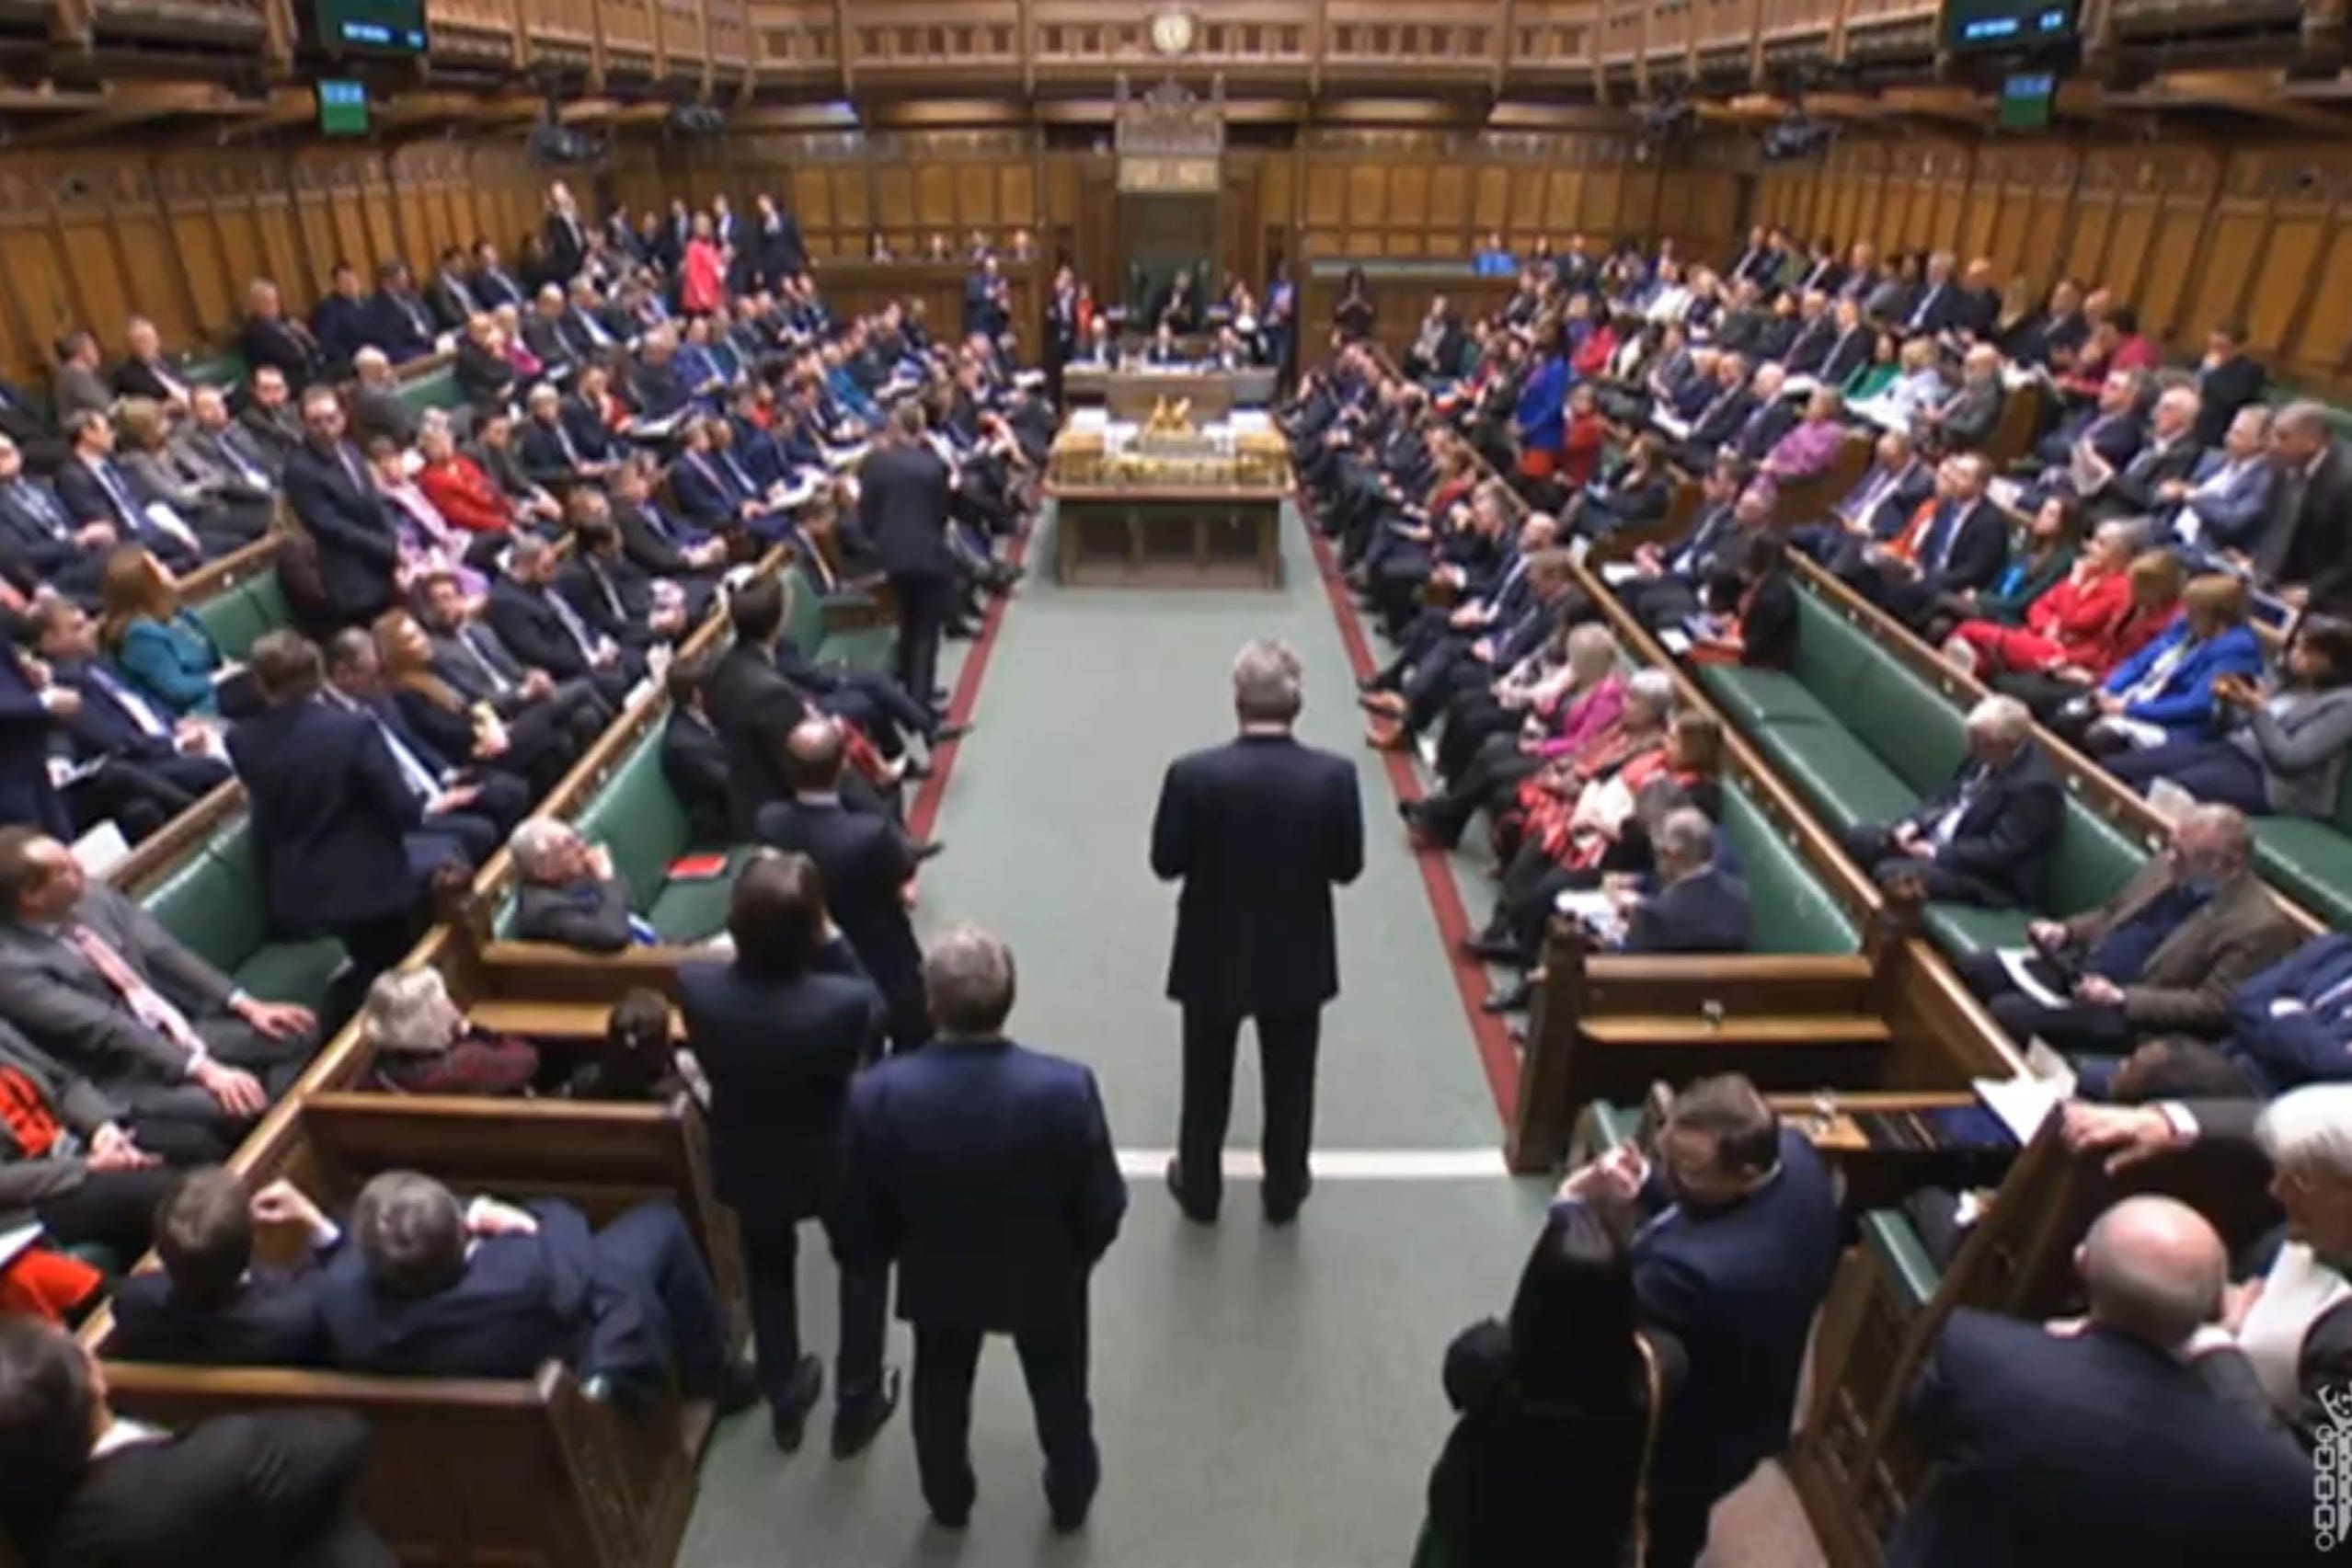 MPs during Prime Minister’s Questions in the House of Commons (House of Commons/PA)